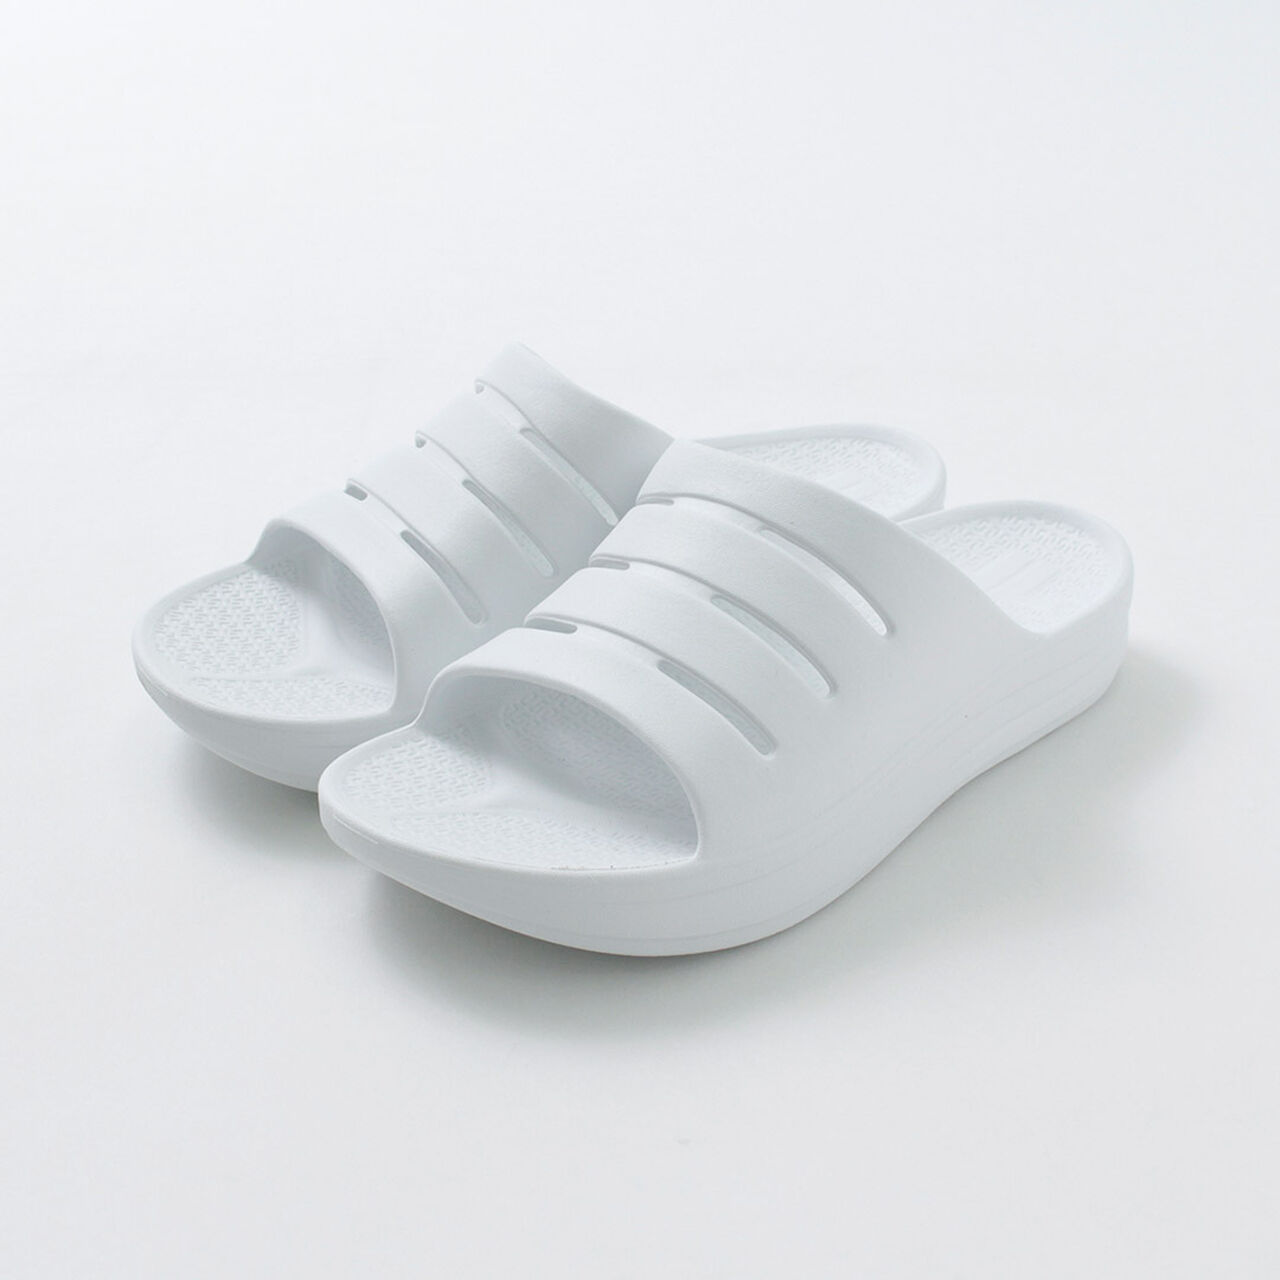 Slide Recovery sandals,White, large image number 0